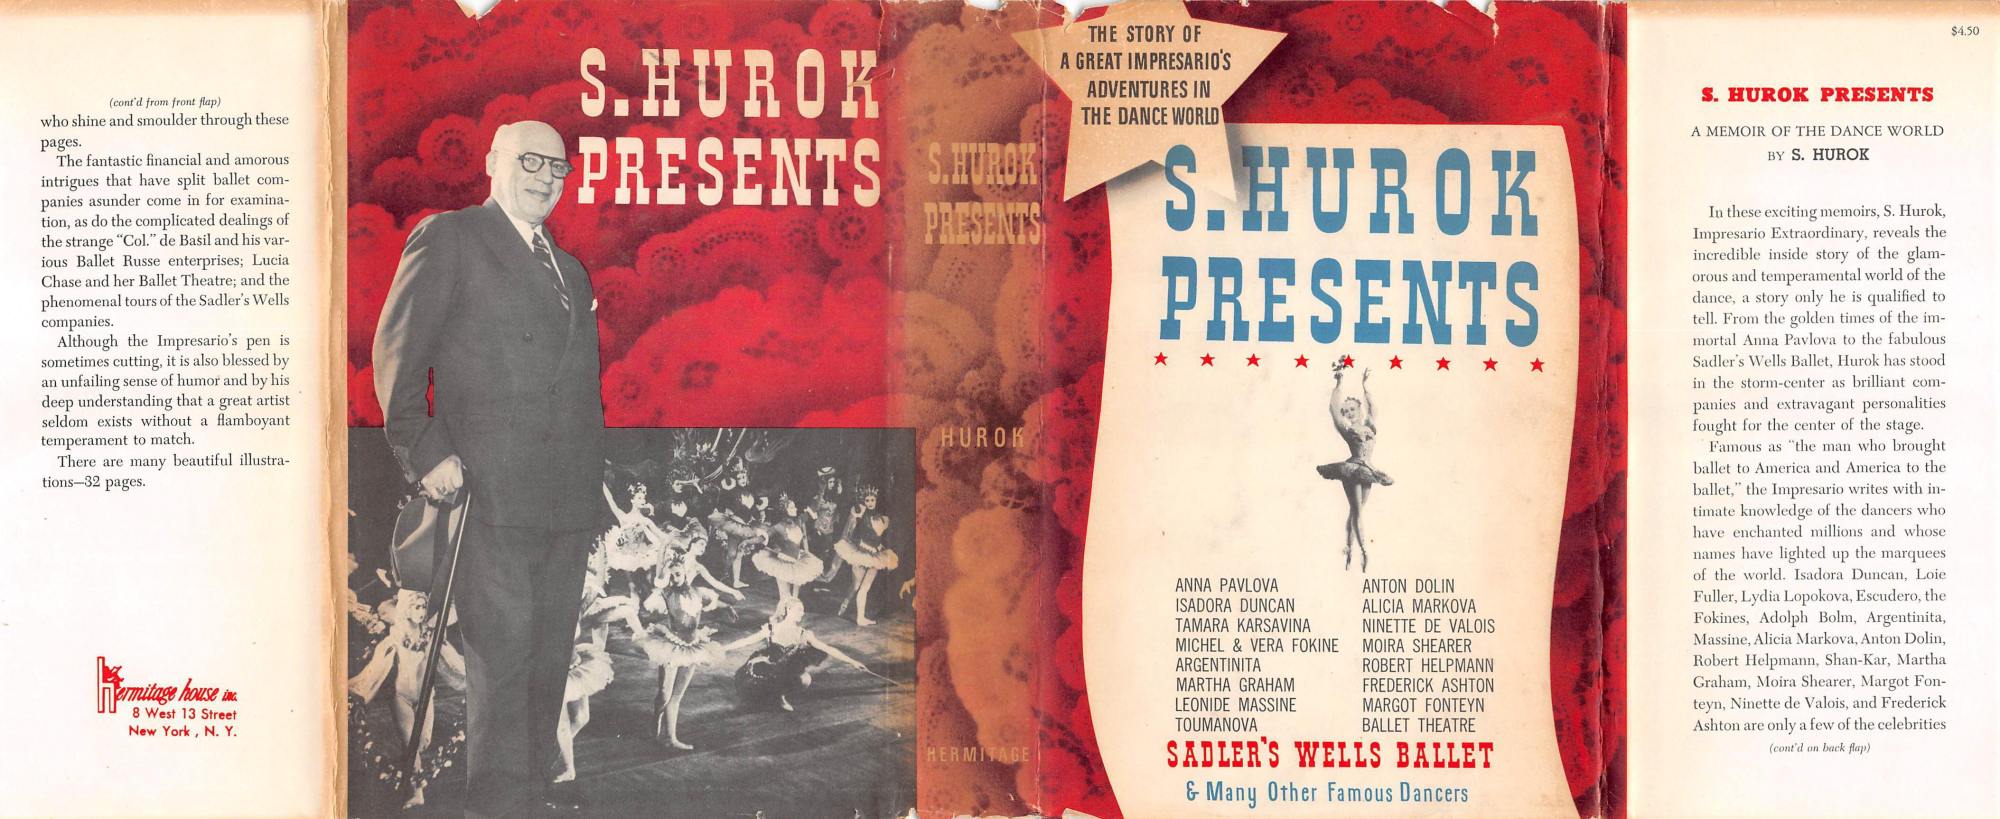 The Project Gutenberg eBook of a memoir of the Dance World, by Sol Hurok. picture photo